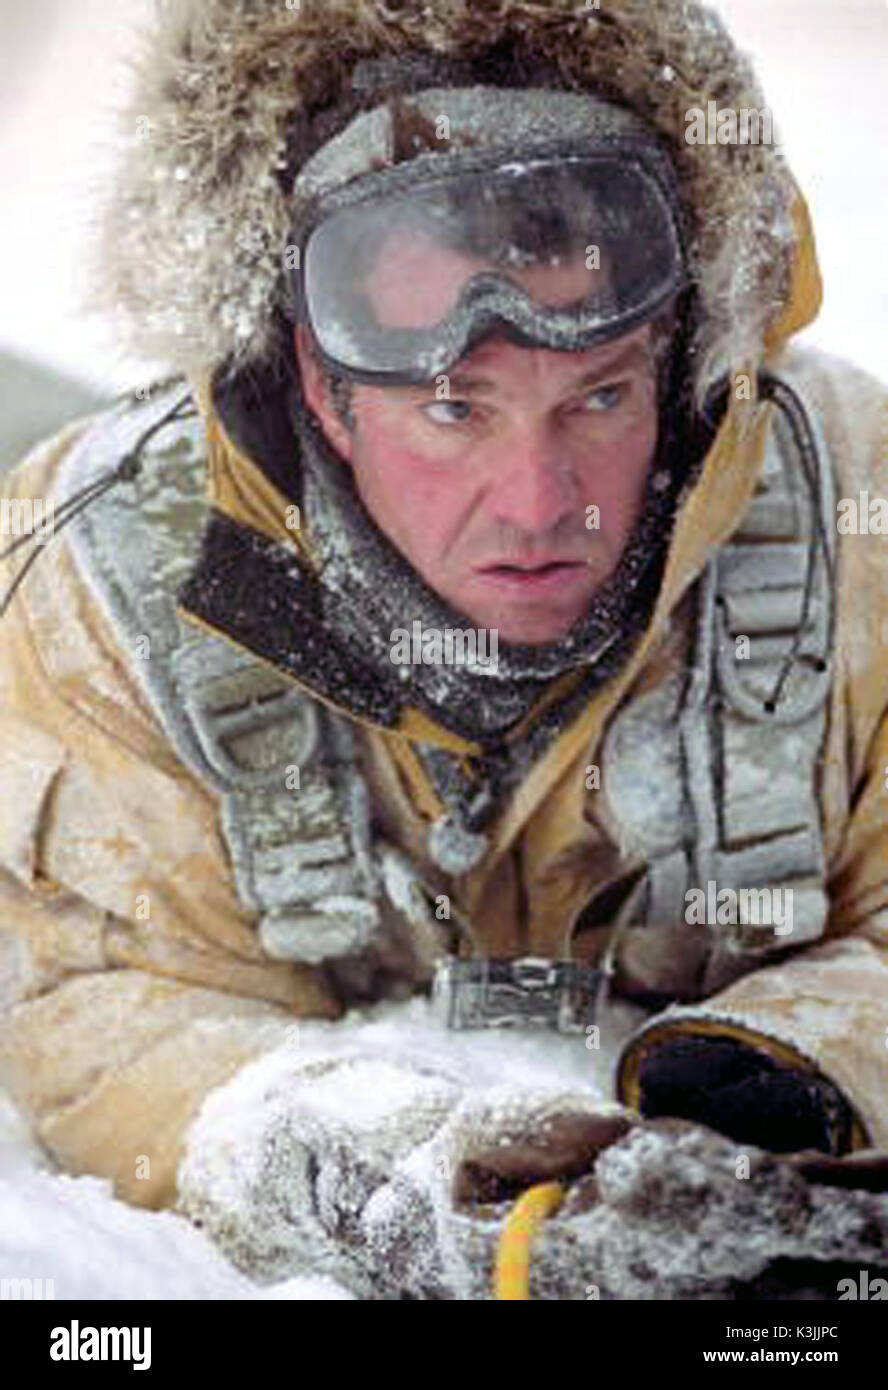 the-day-after-tomorrow-dennis-quaid-the-